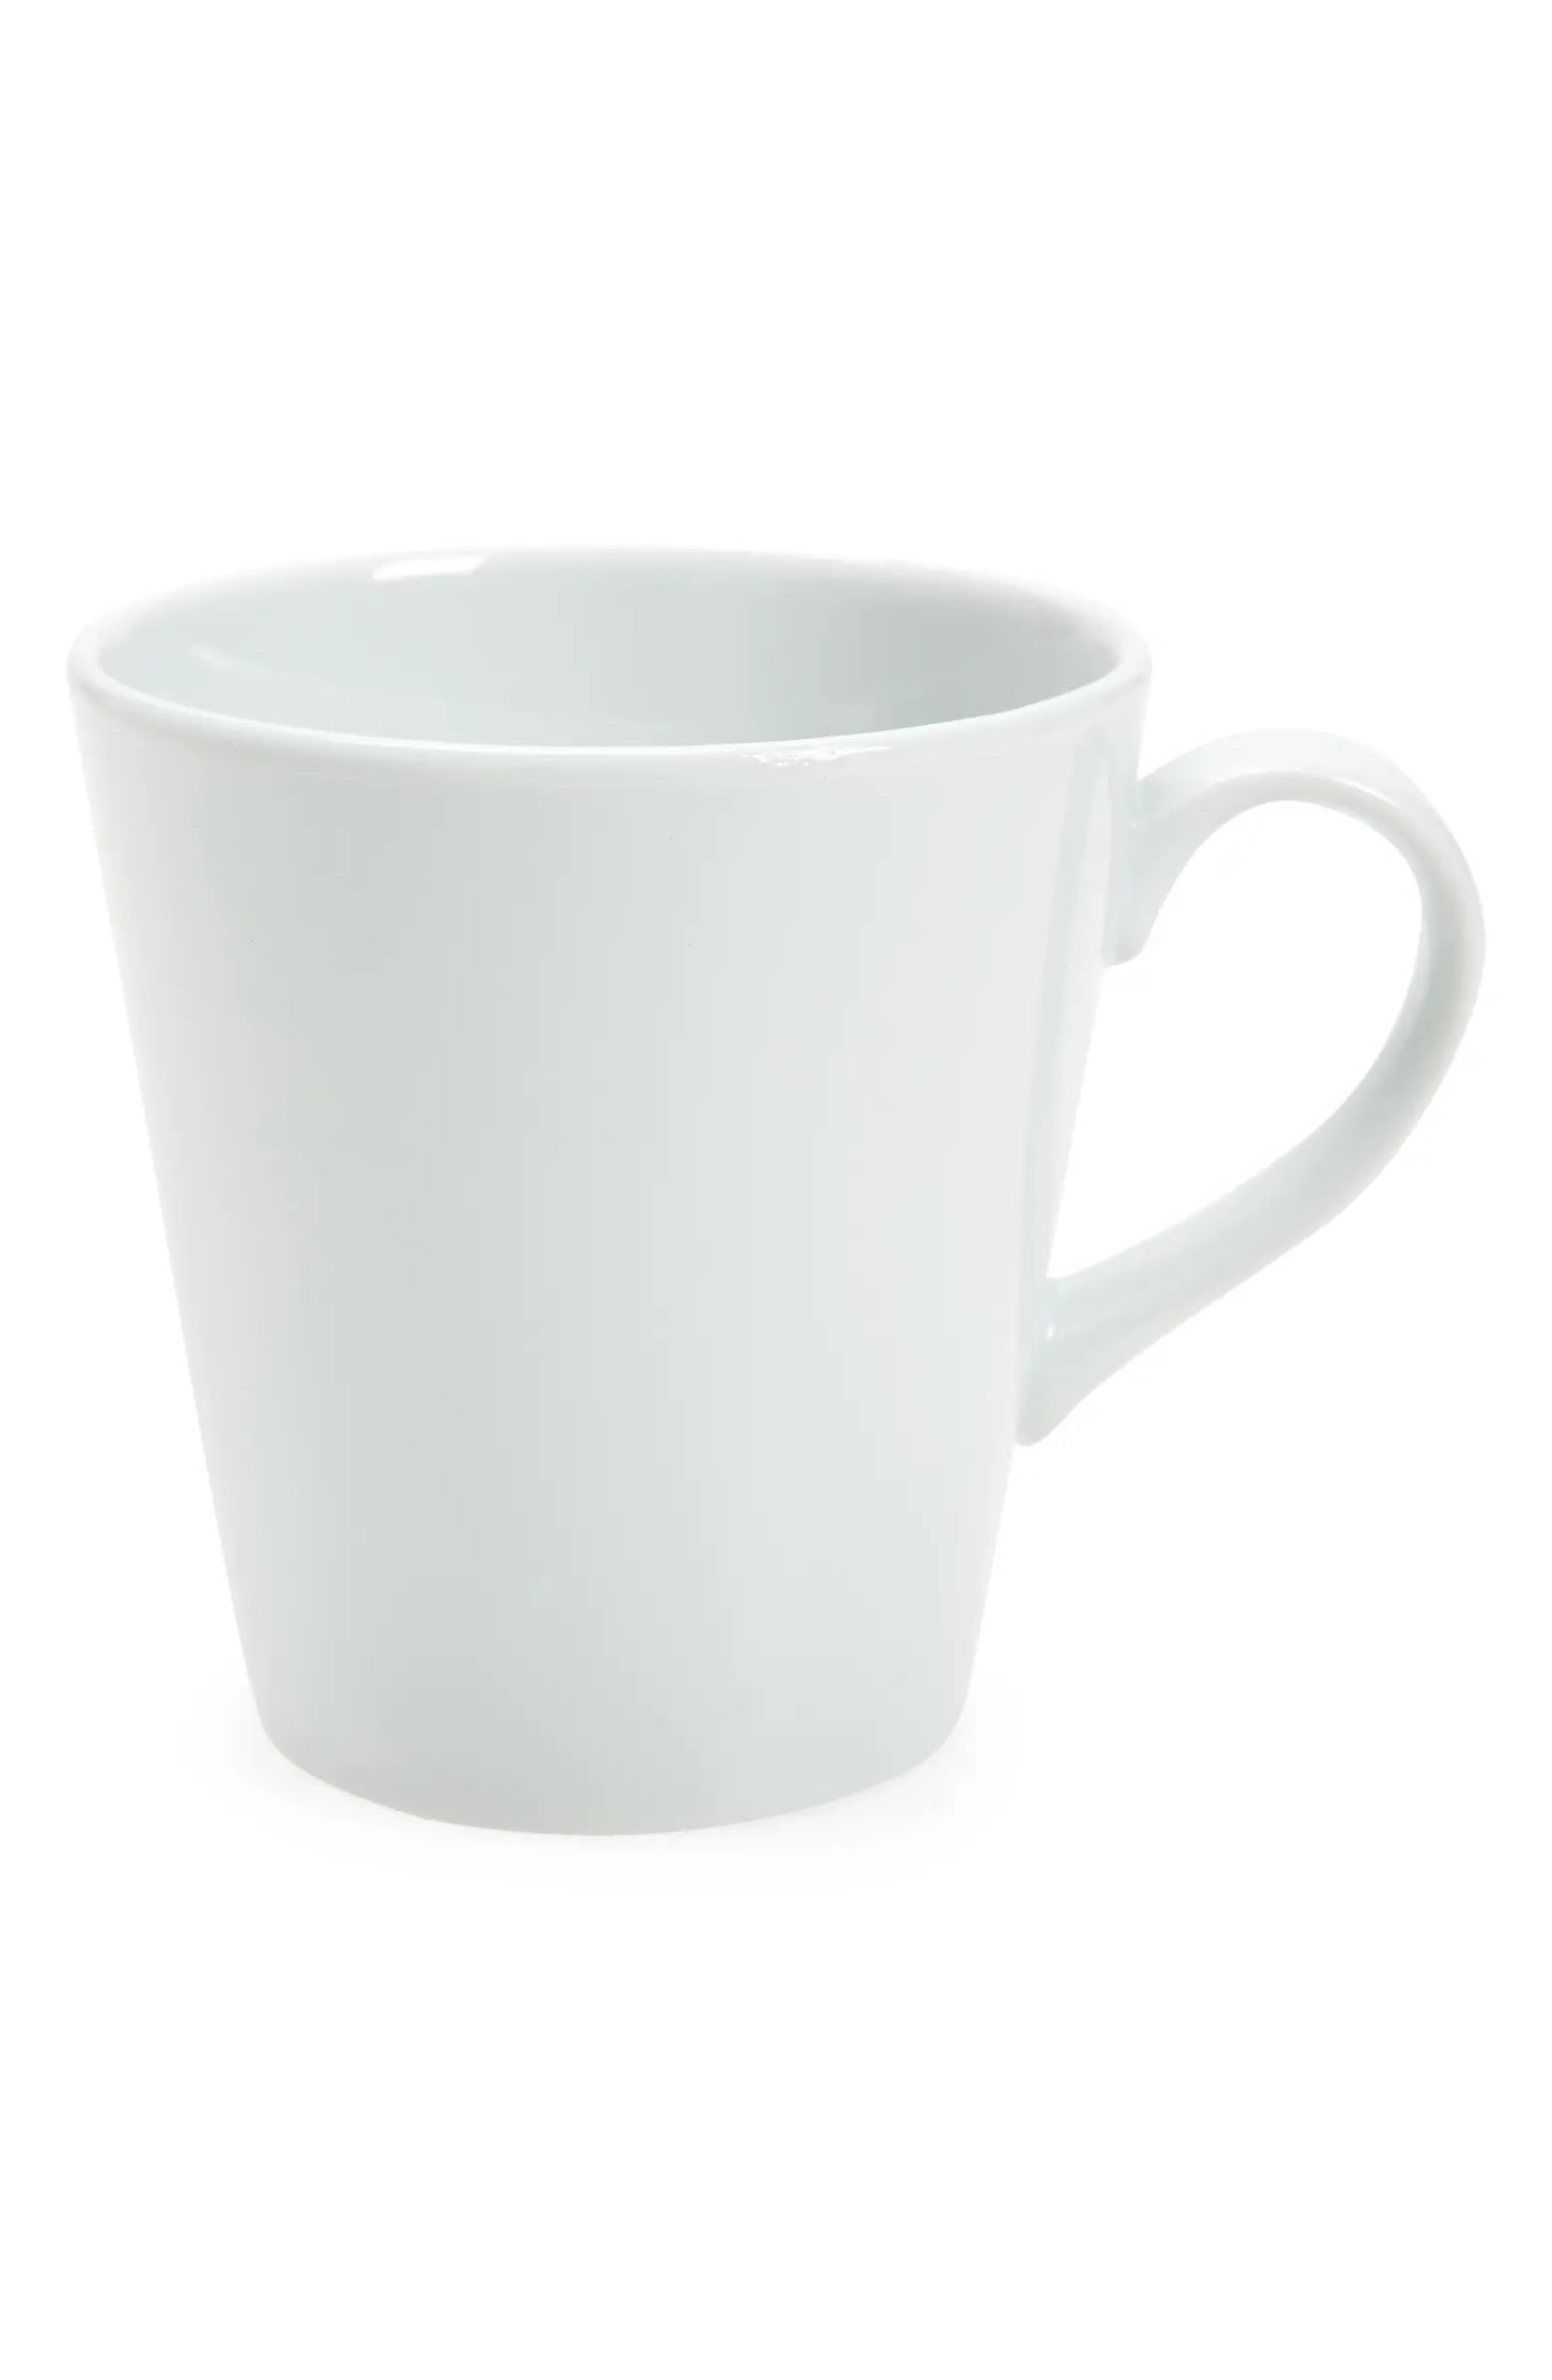 Coupe Porcelain Coffee Cup | Nordstrom